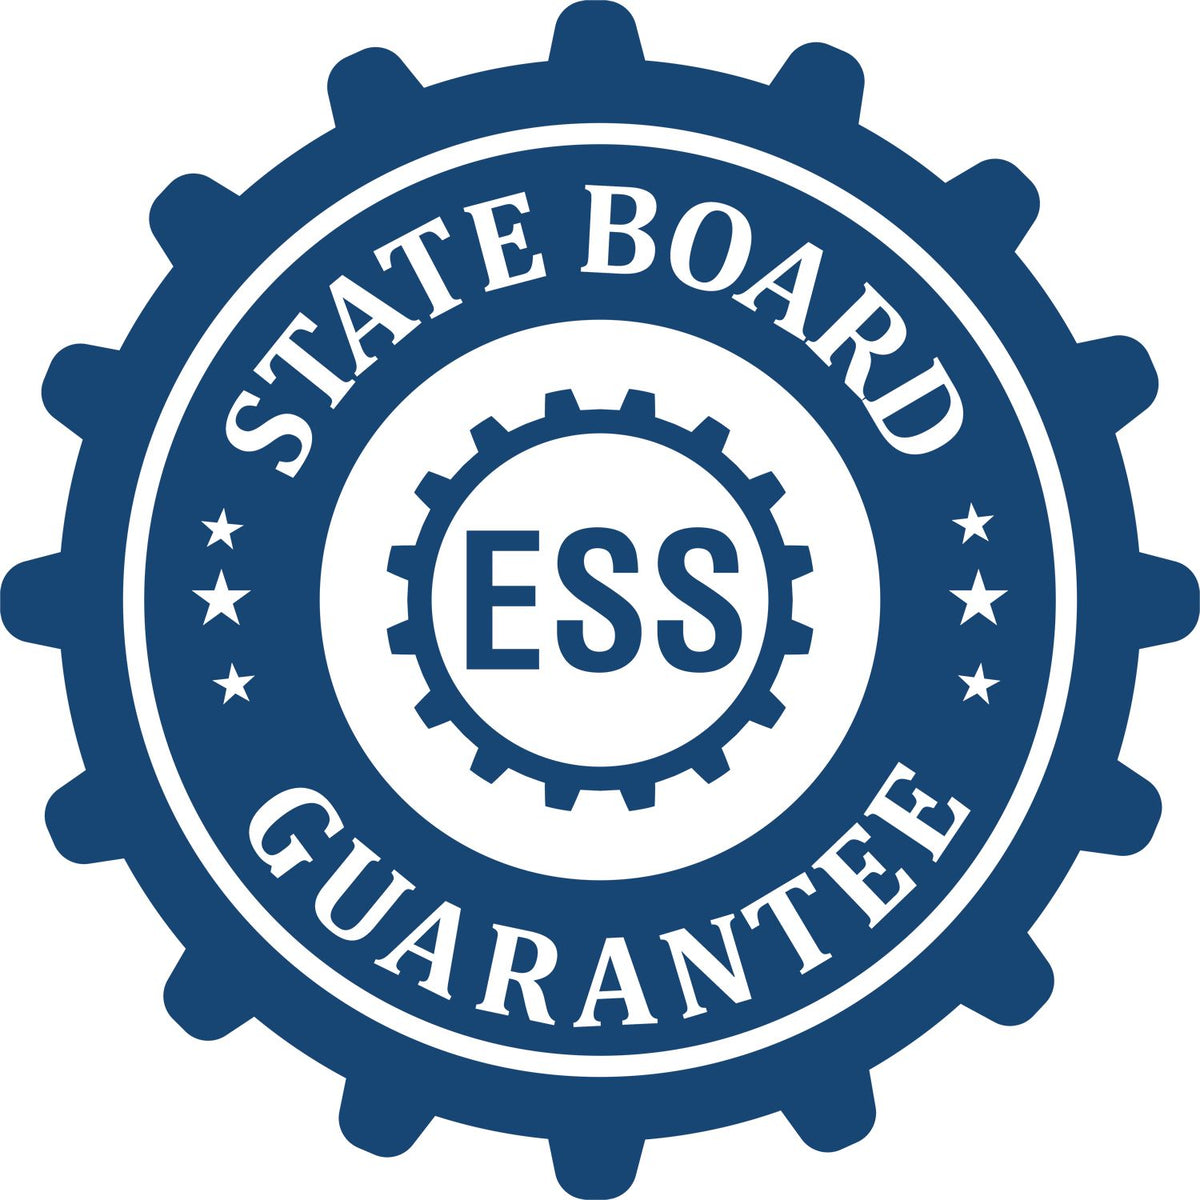 An emblem in a gear shape illustrating a state board guarantee for the Connecticut Landscape Architectural Seal Stamp product.